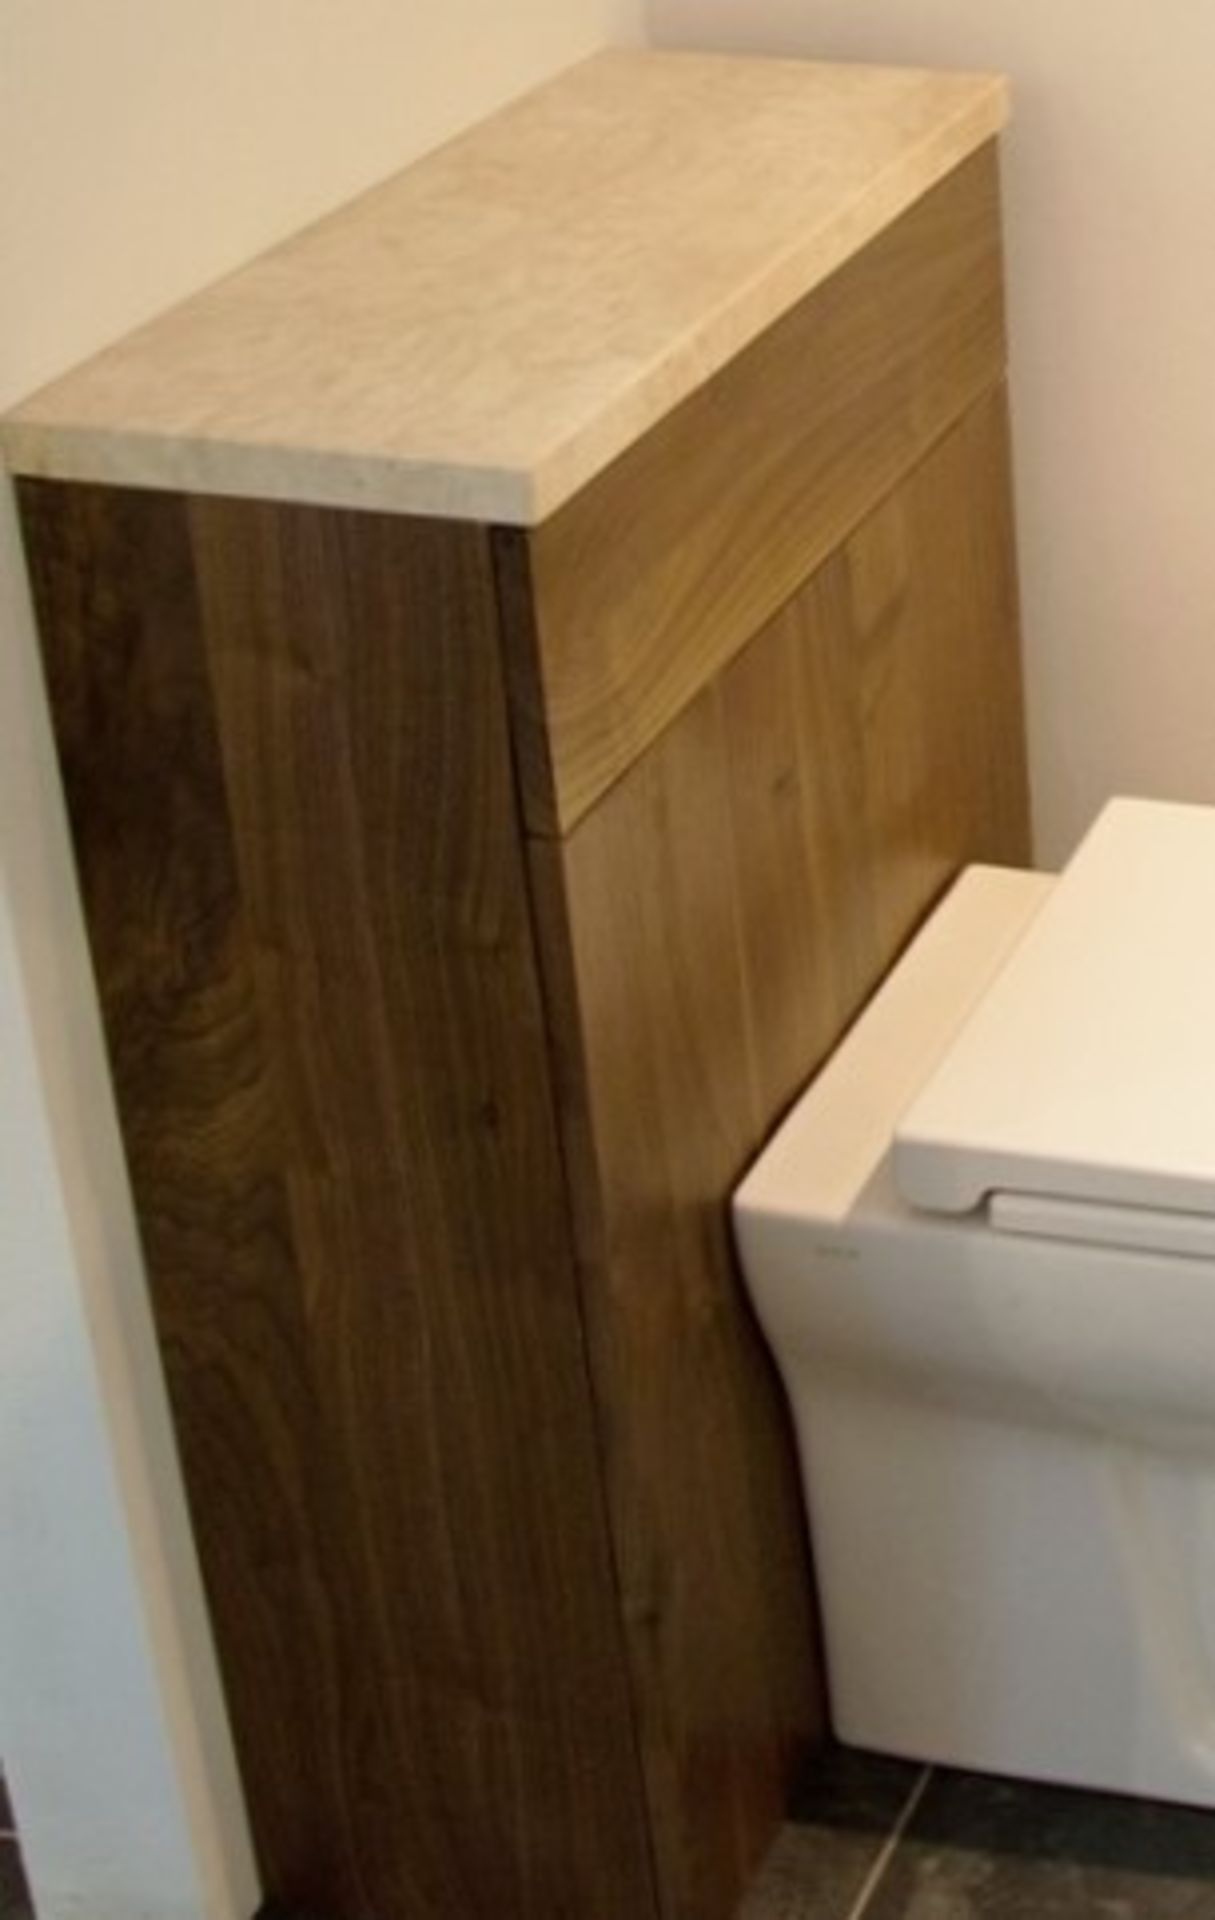 1 x Stonearth WC Toilet Unit With Marble Stone Cover - American Solid Walnut - Original RRP £888 - Image 4 of 10